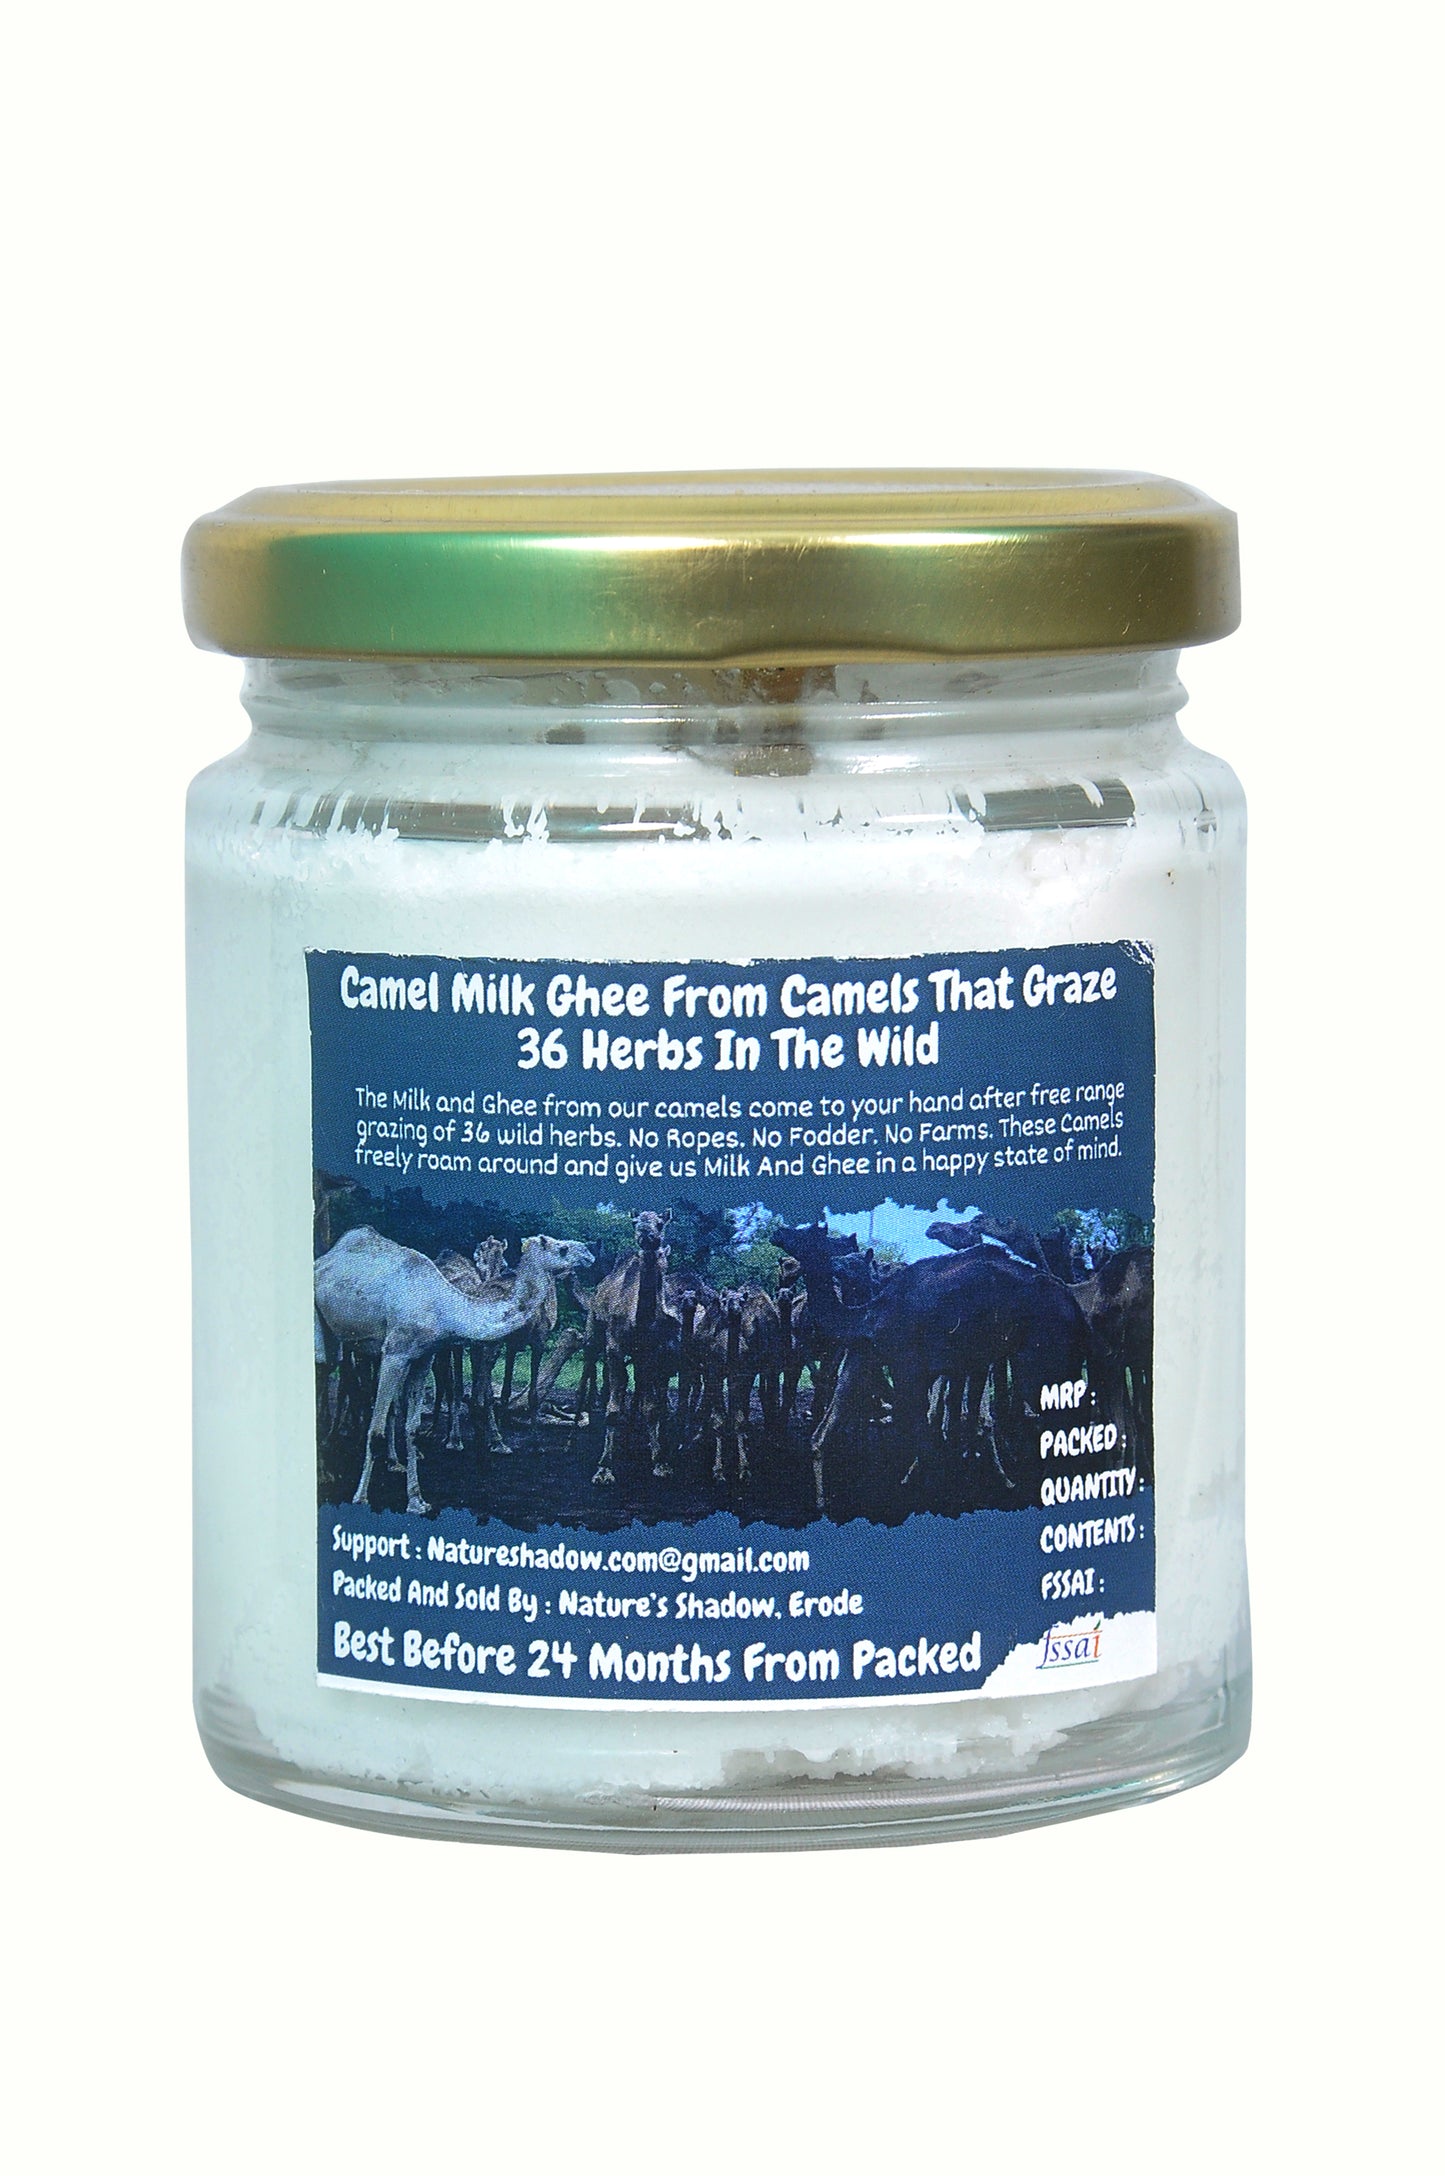 Camel Milk Ghee - From Camels That Graze 36 Herbs In The Wild - 150 Grams